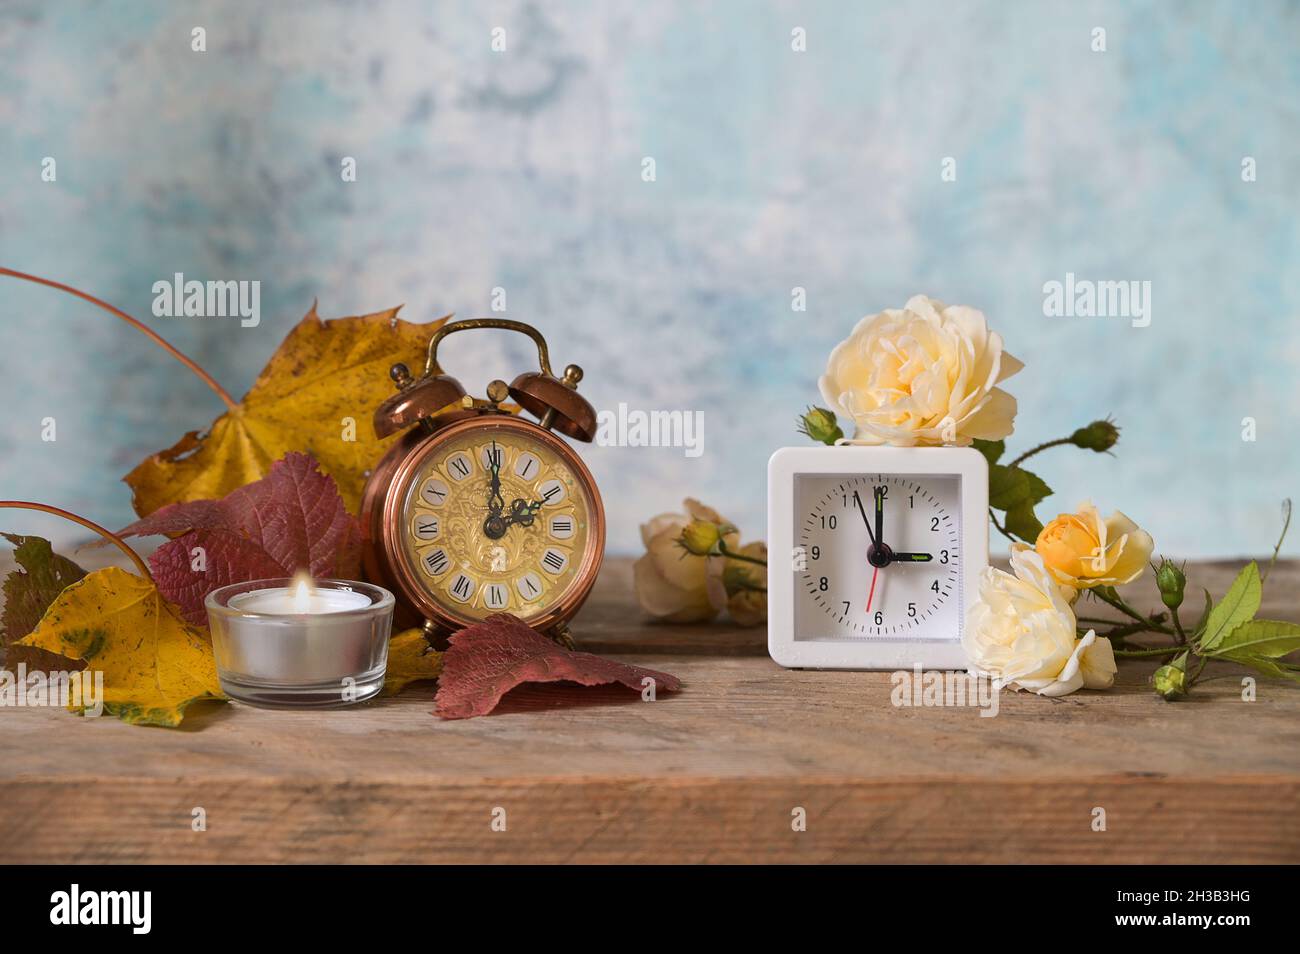 Clock change, two alarm clocks, retro style and modern, showing winter time and summer time, autumn leaves and flowers on rustic wood, light blue back Stock Photo